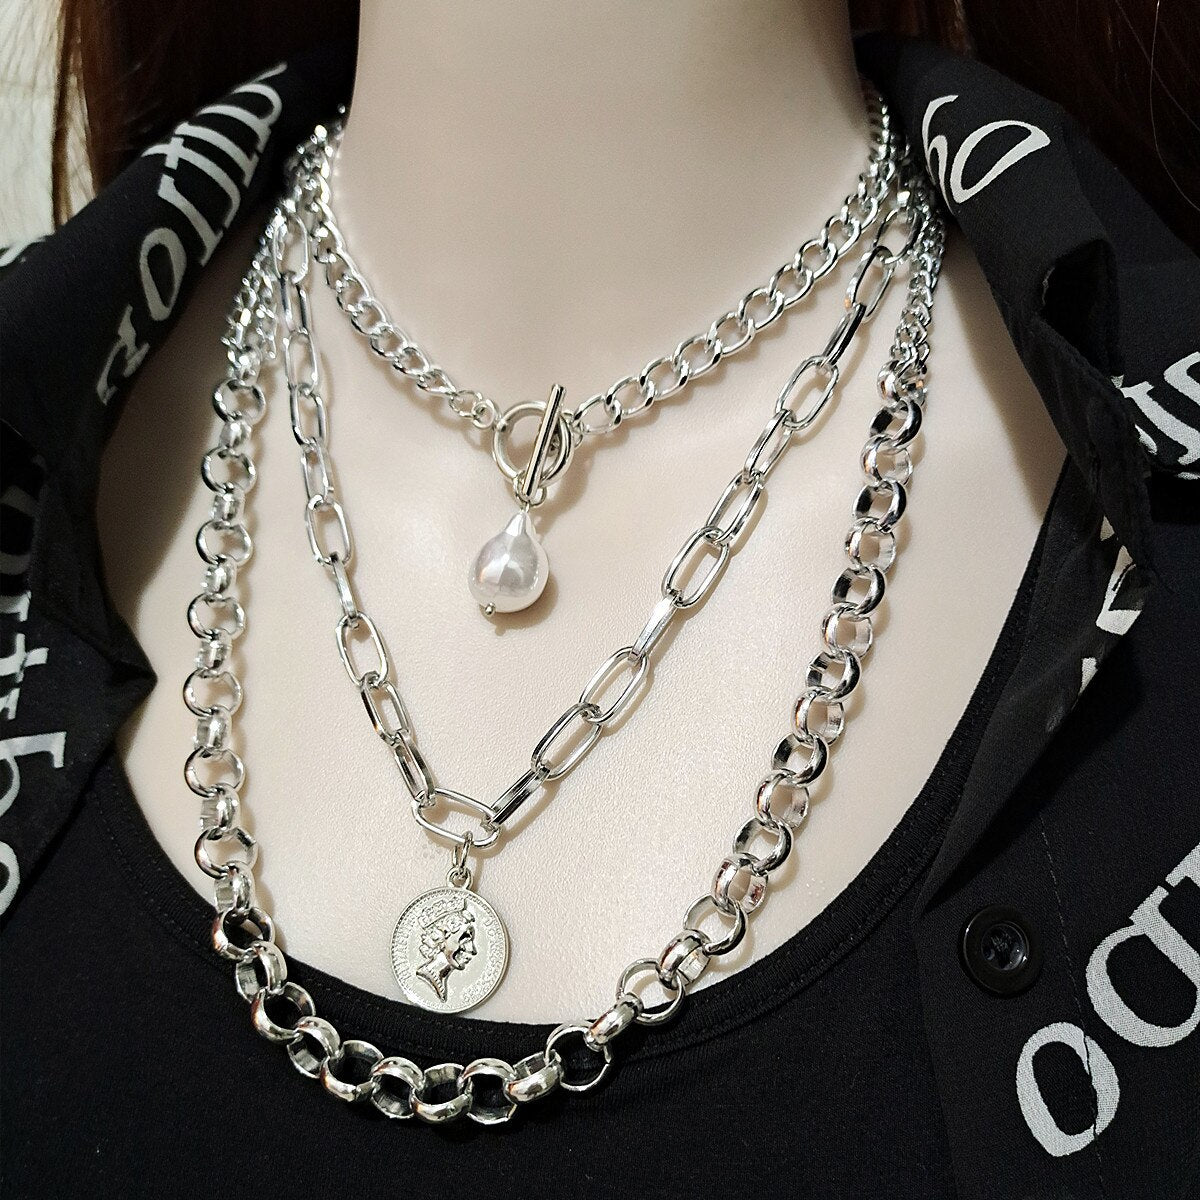 DIEZI Multilayer Baroque Pearl Chain Necklace Statement Party Gift Carved Coin Human Head Pendant Necklaces 2021 New Jewelry